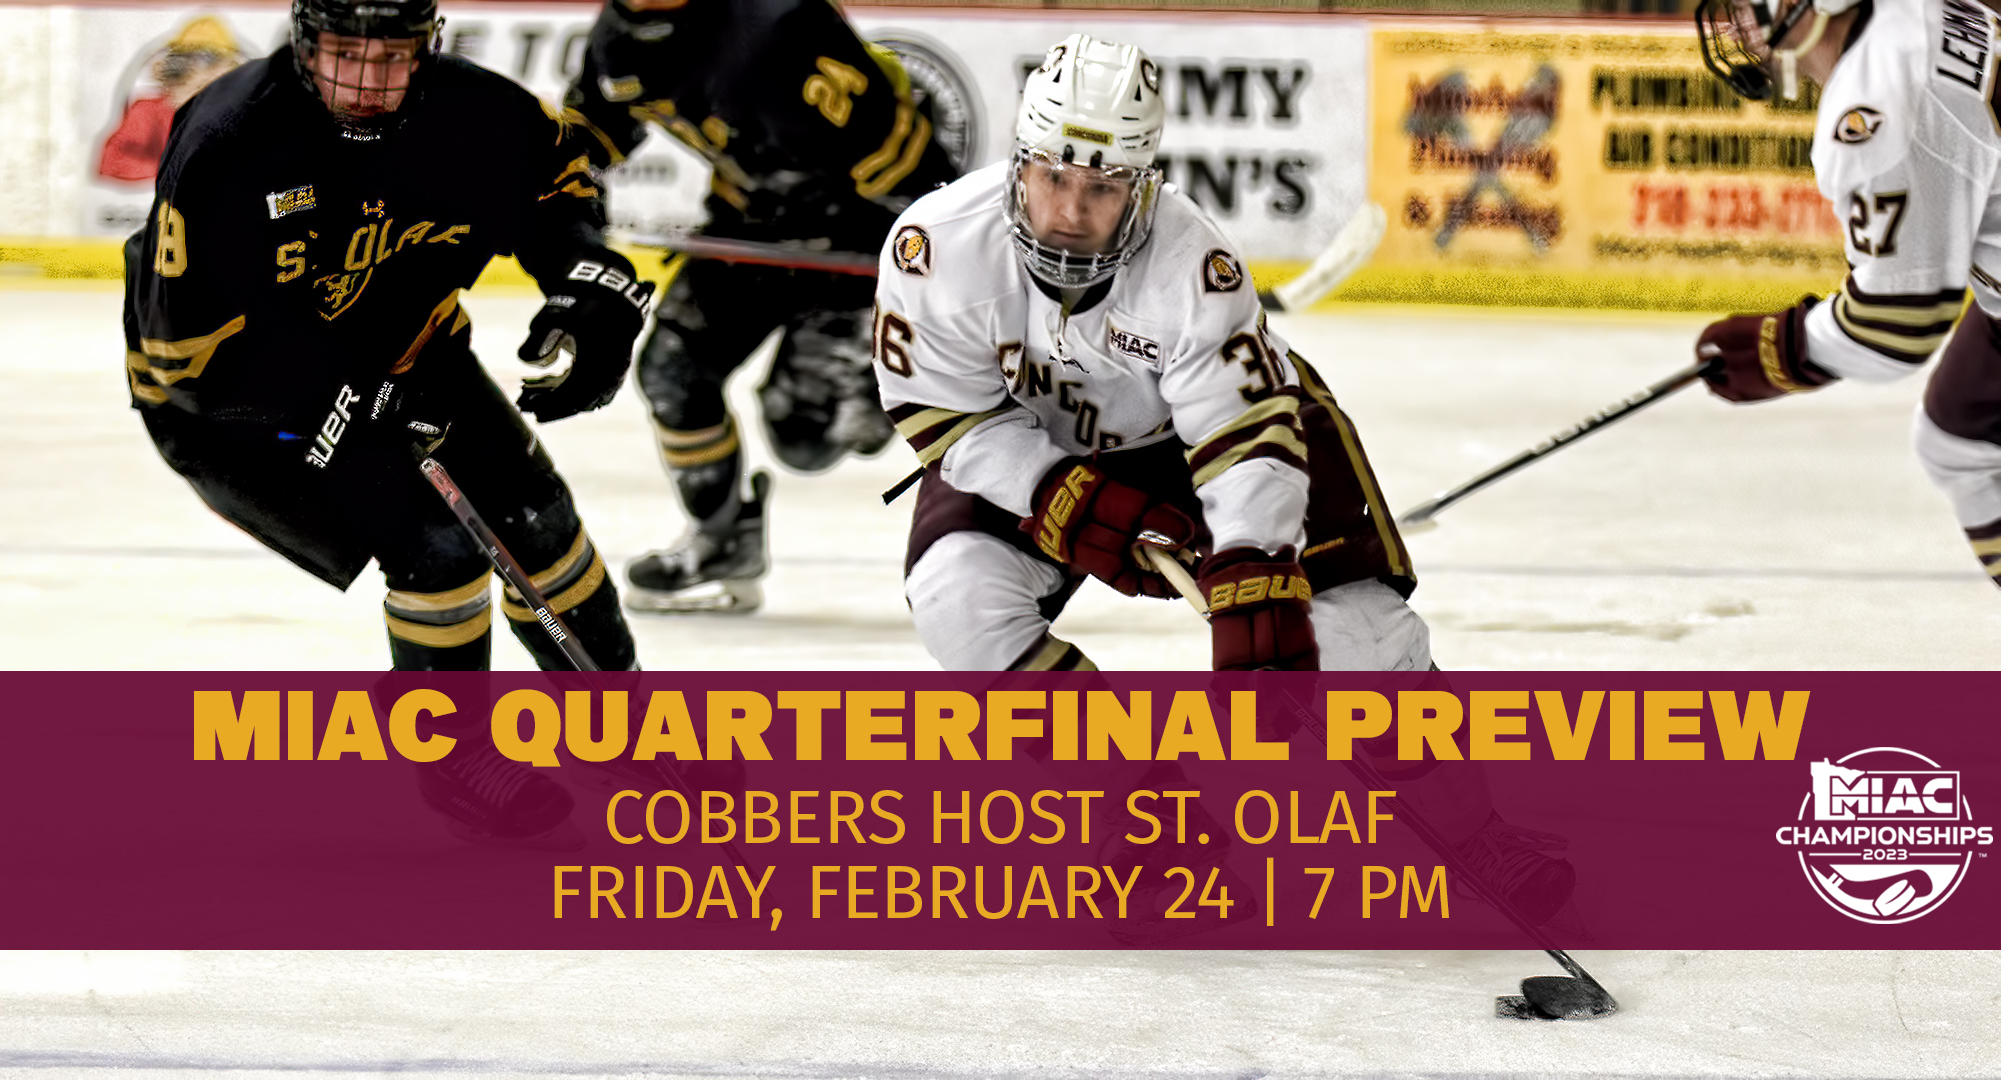 Concordia hosts St. Olaf in the quarterfinals of the MIAC playoffs which is a rematch from last season's quarterfinal game in Moorhead.